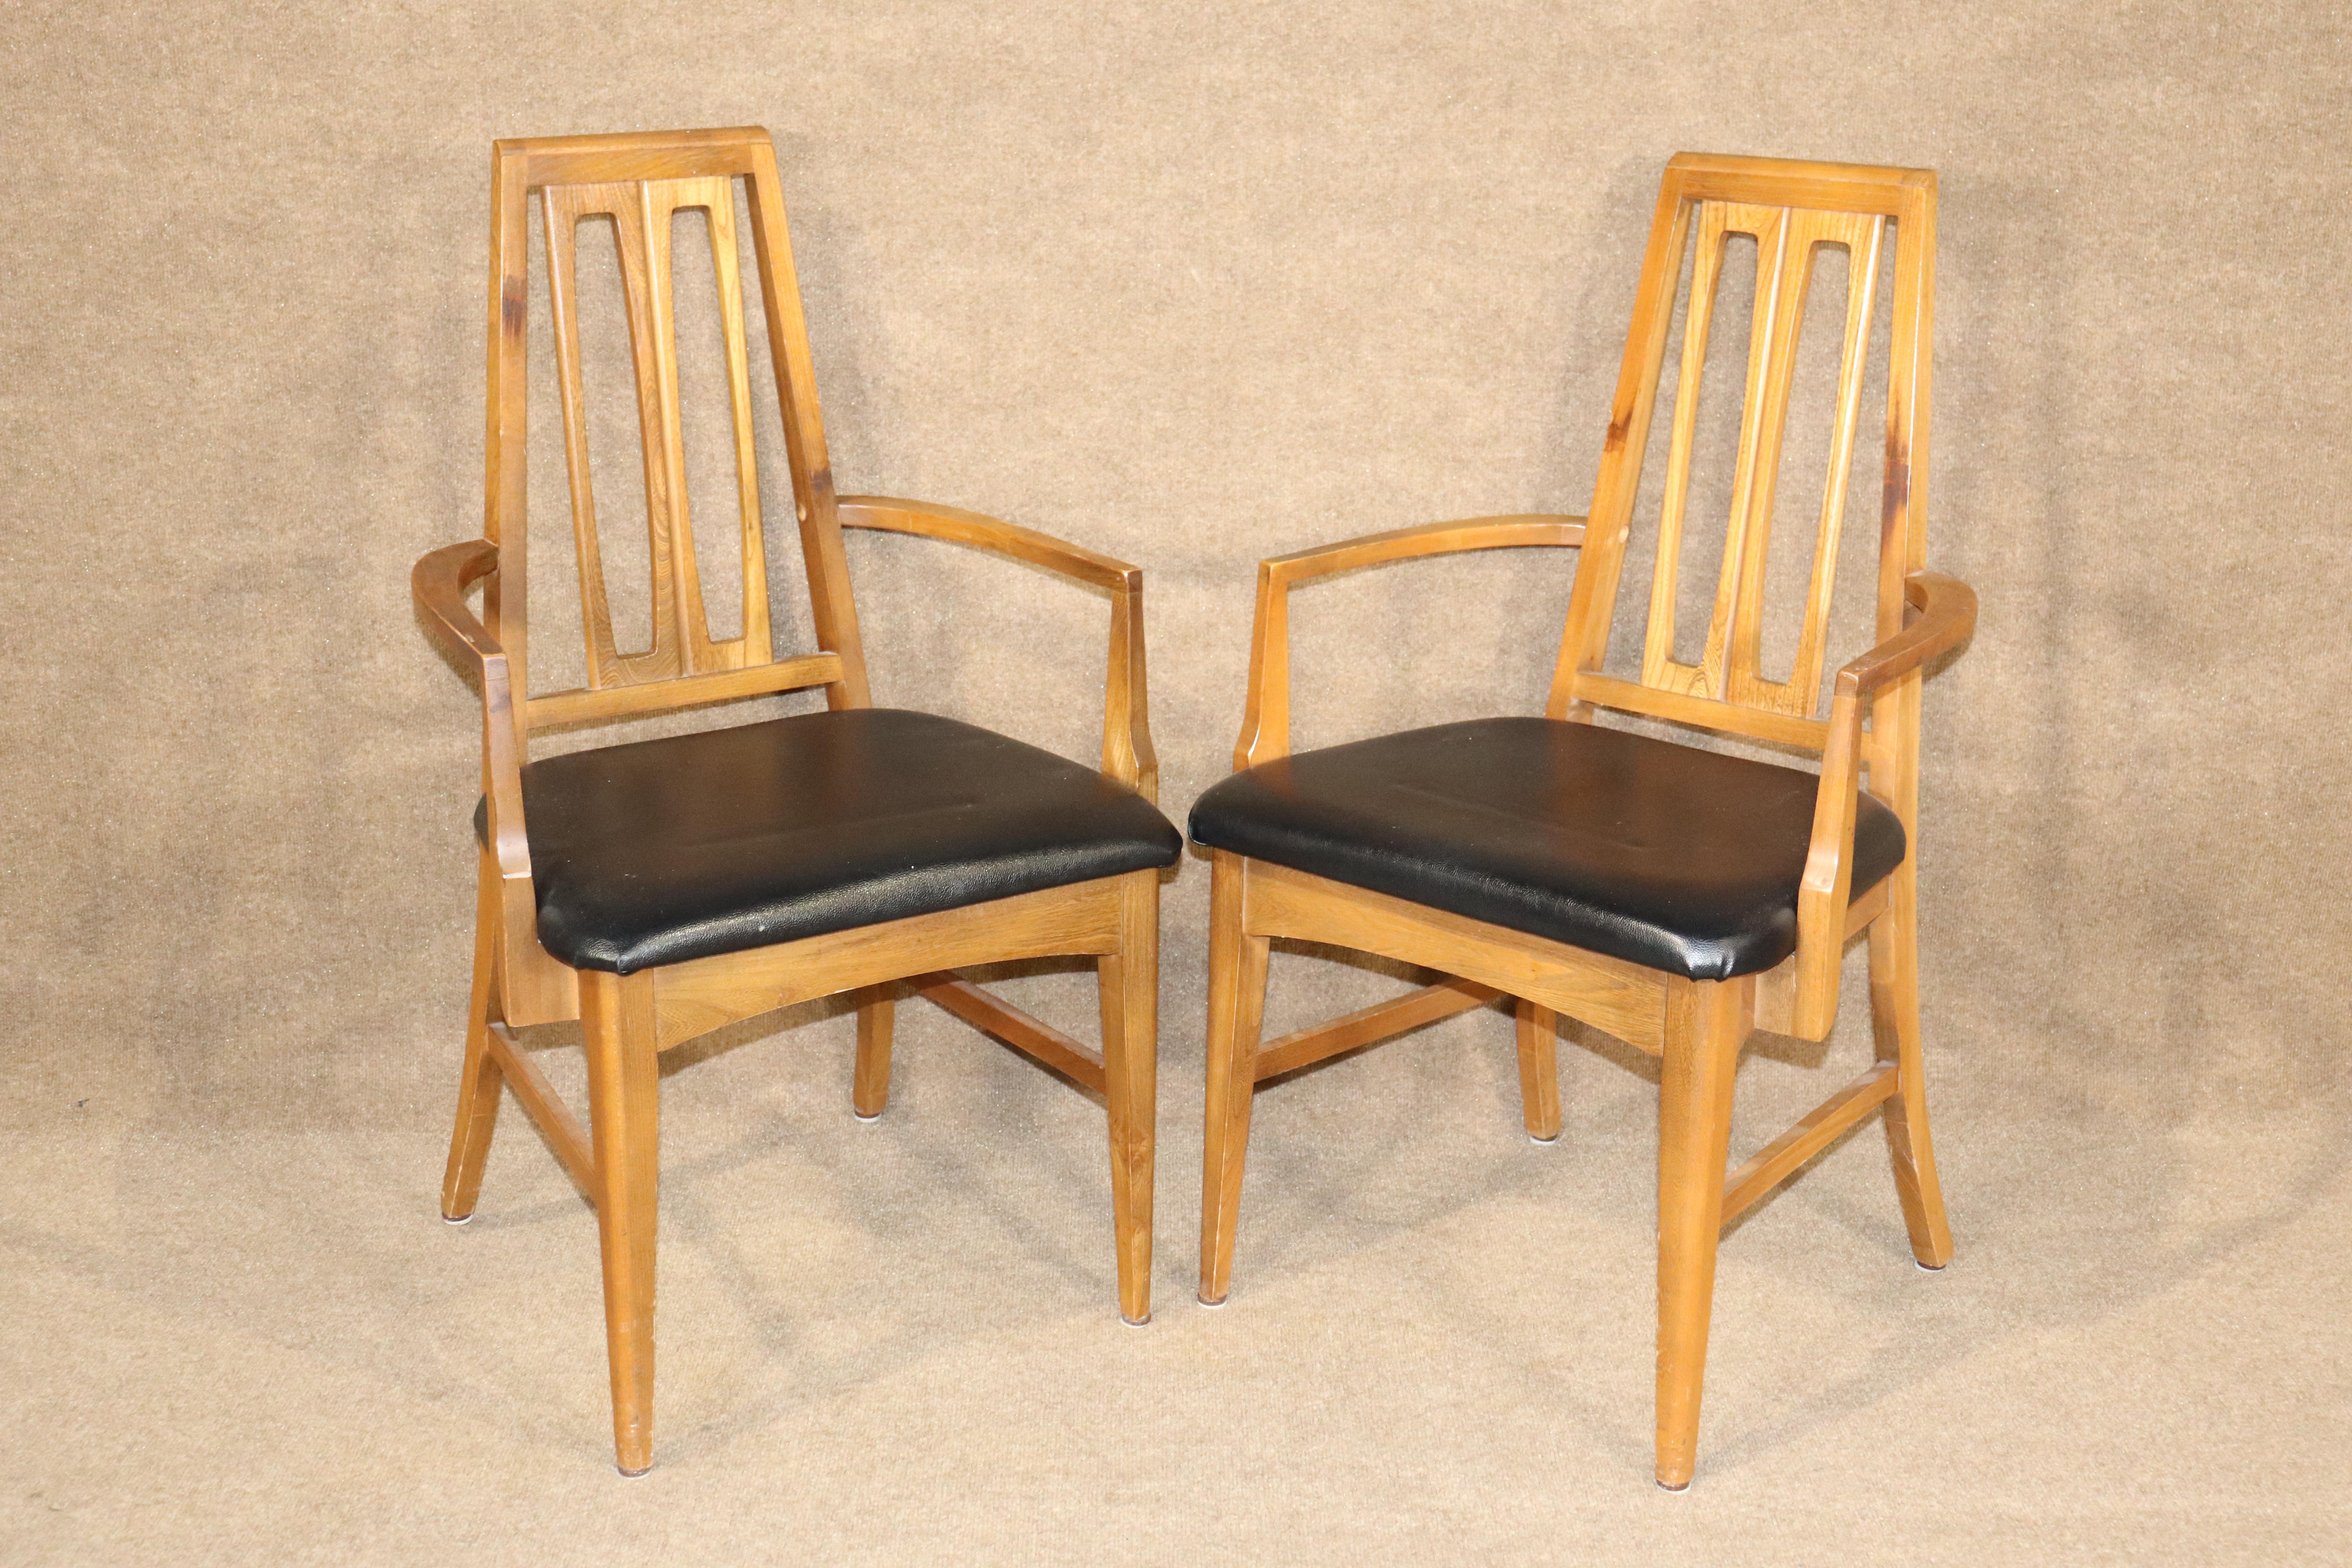 Set of six mid-century dining chairs. Walnut wood frames with black vinyl seats.
Please confirm location NY or NJ.